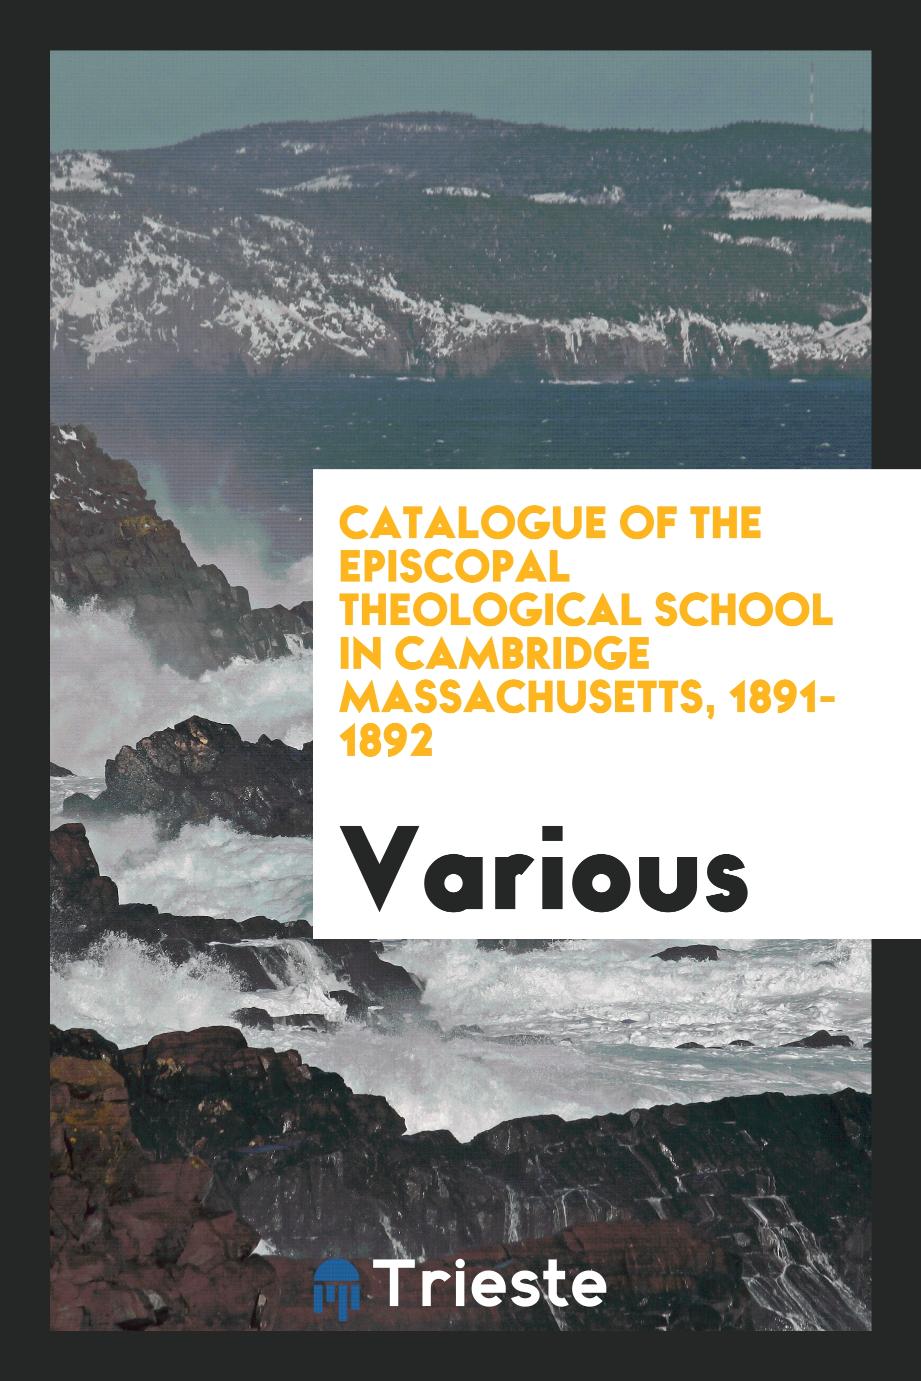 Catalogue of the Episcopal Theological School in Cambridge Massachusetts, 1891-1892